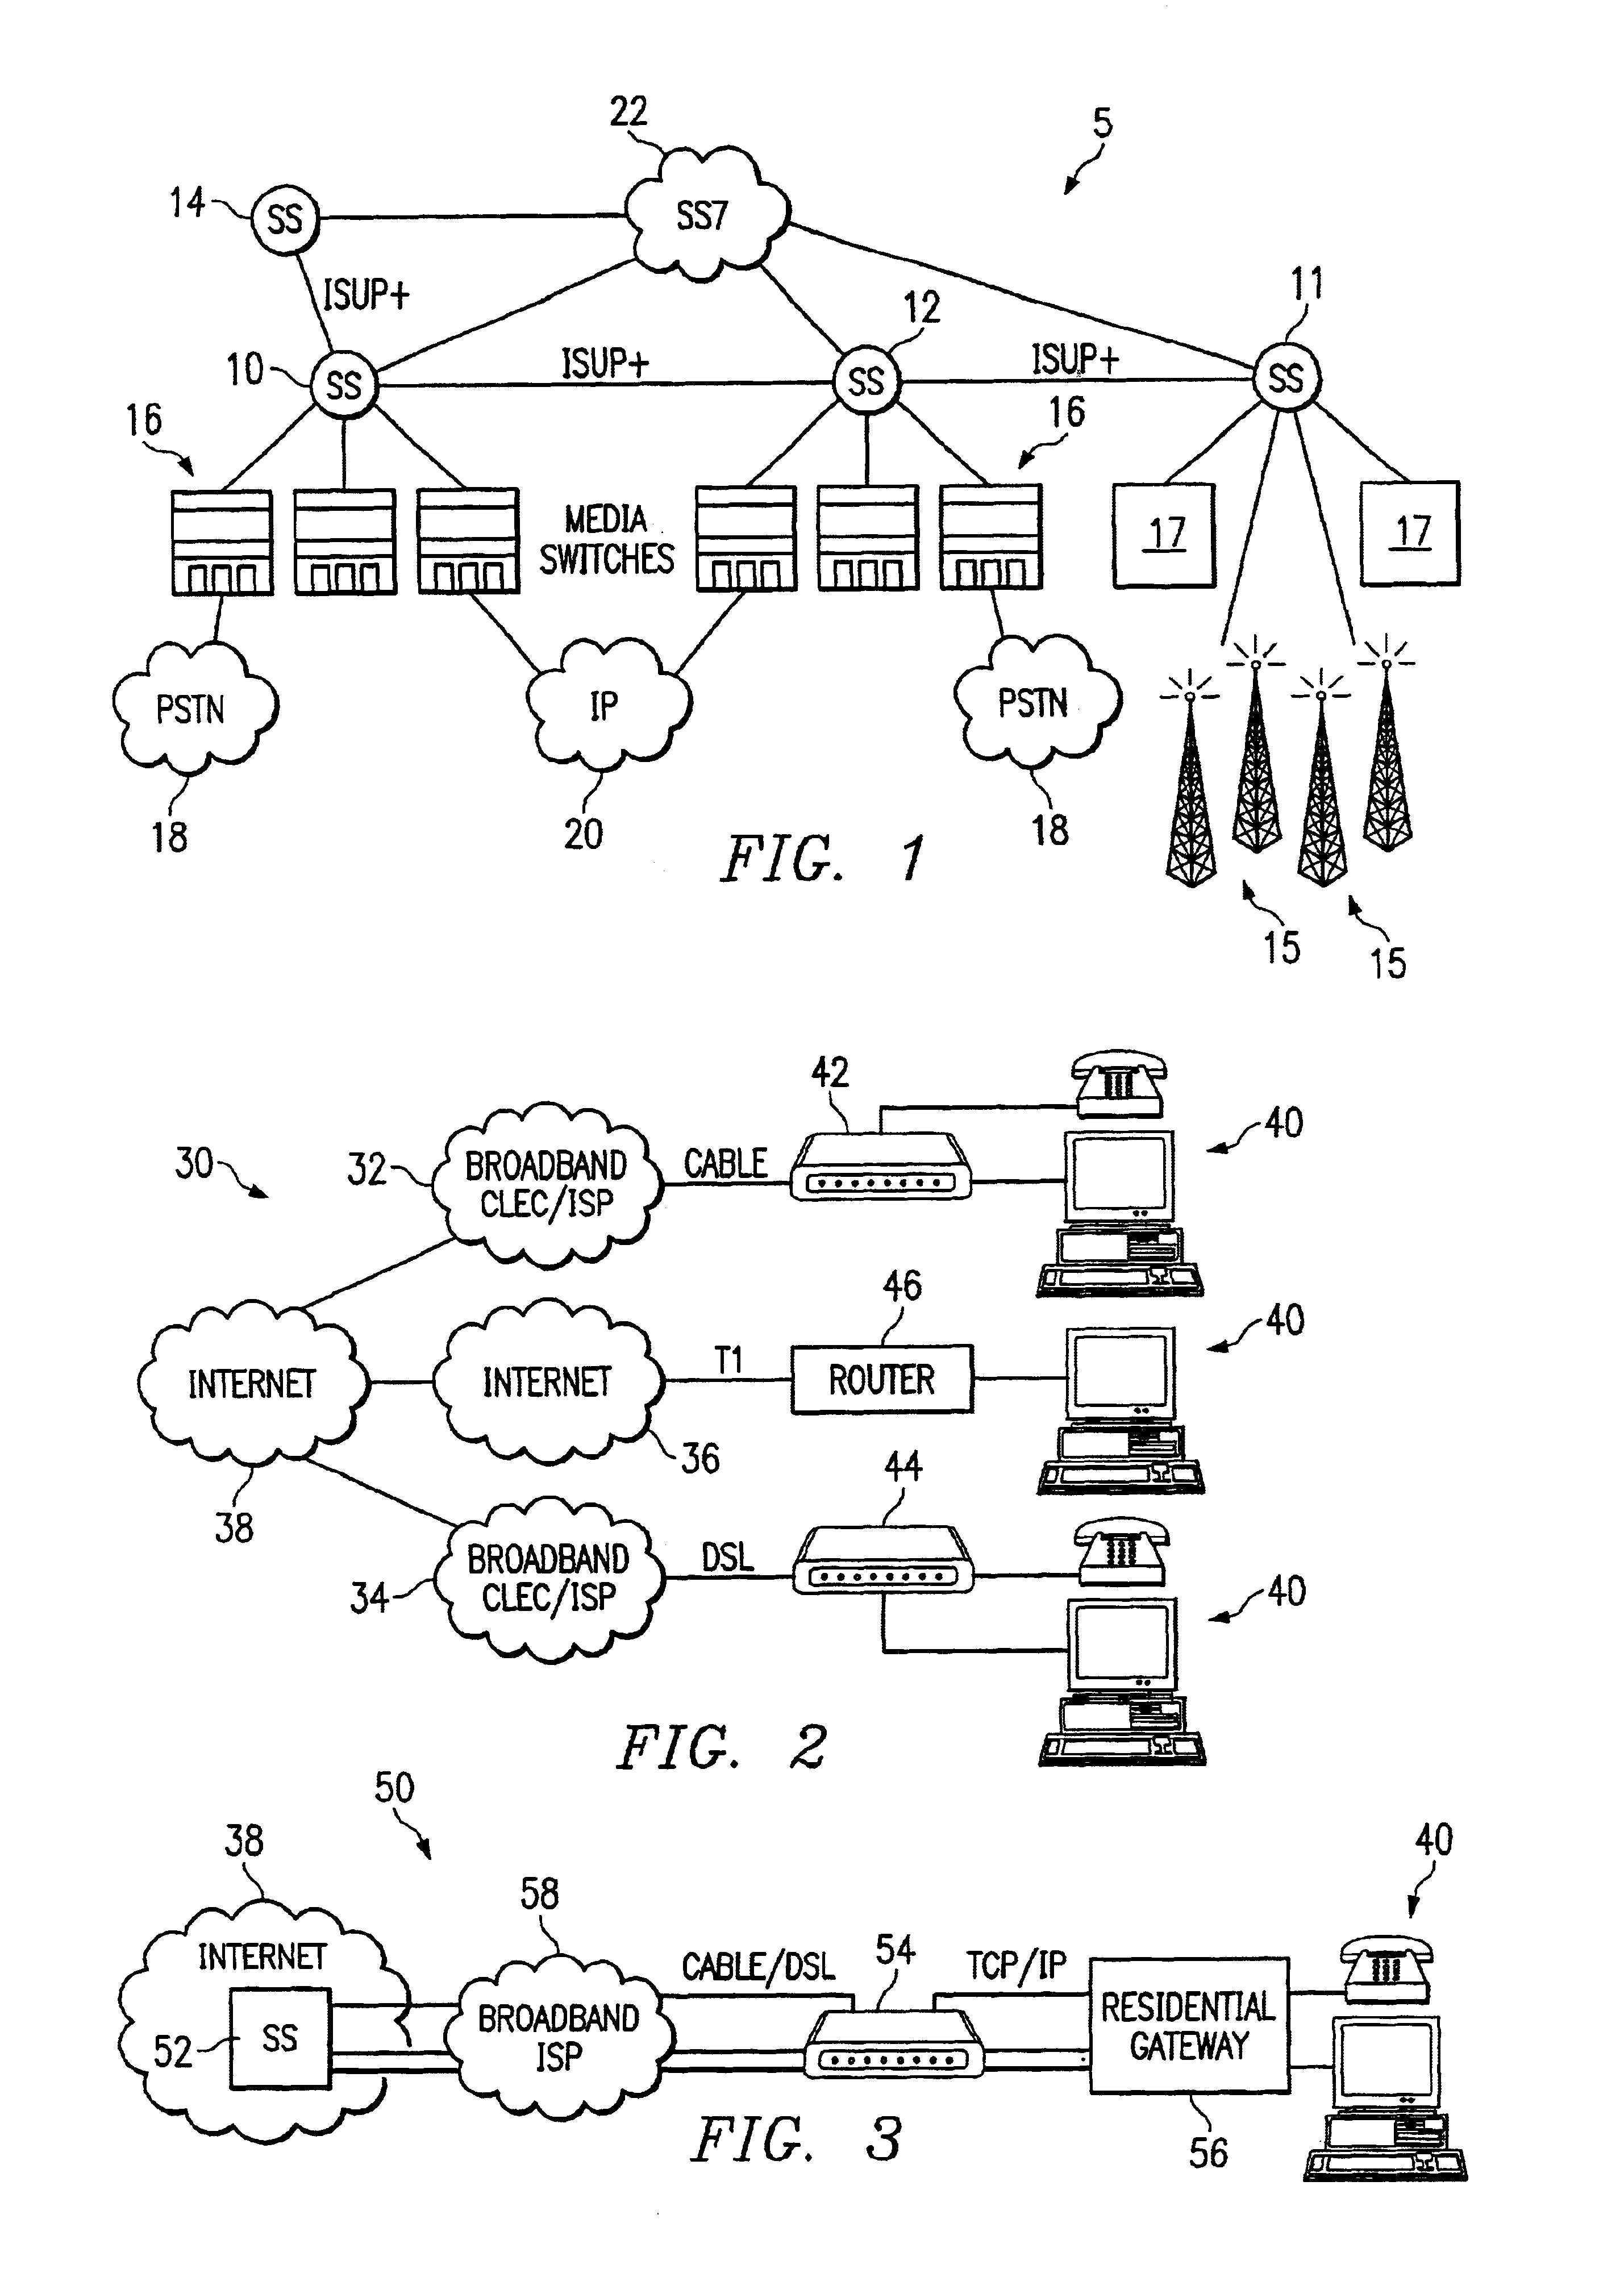 System and method to internetwork wireless telecommunication networks